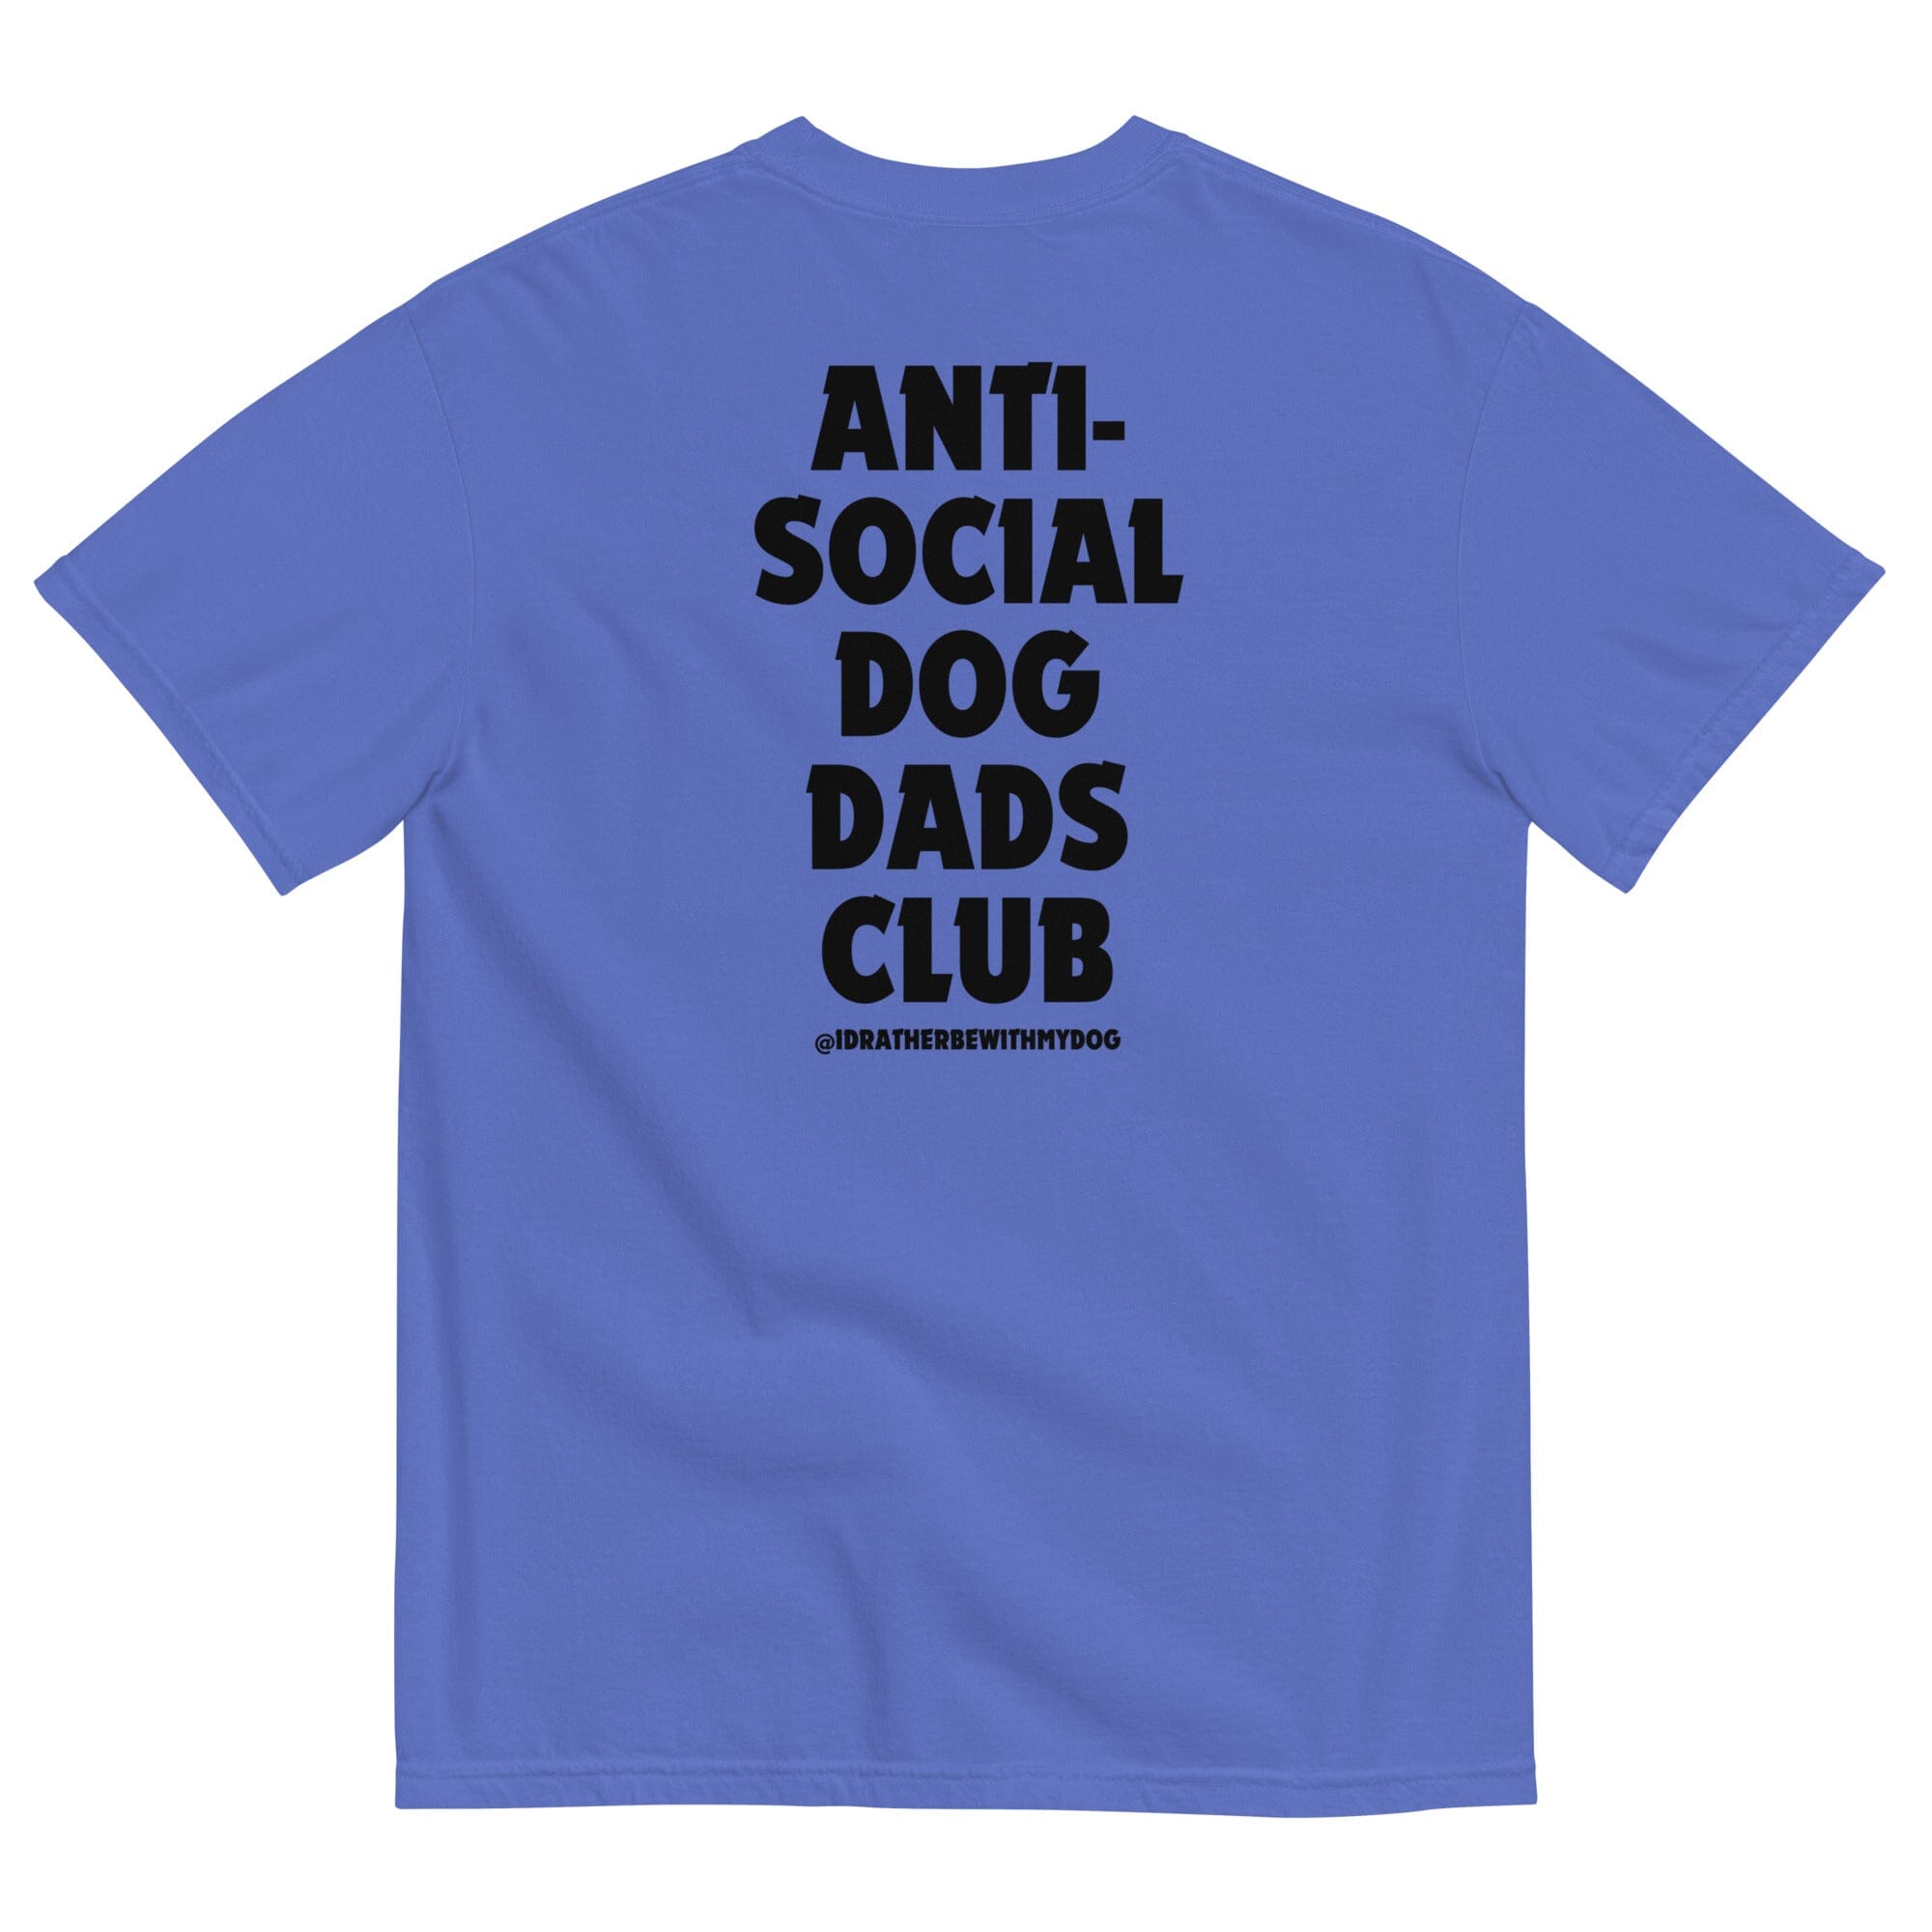 ANTI-SOCIAL DADS CLUB (UNISEX PIGMENT DYED)